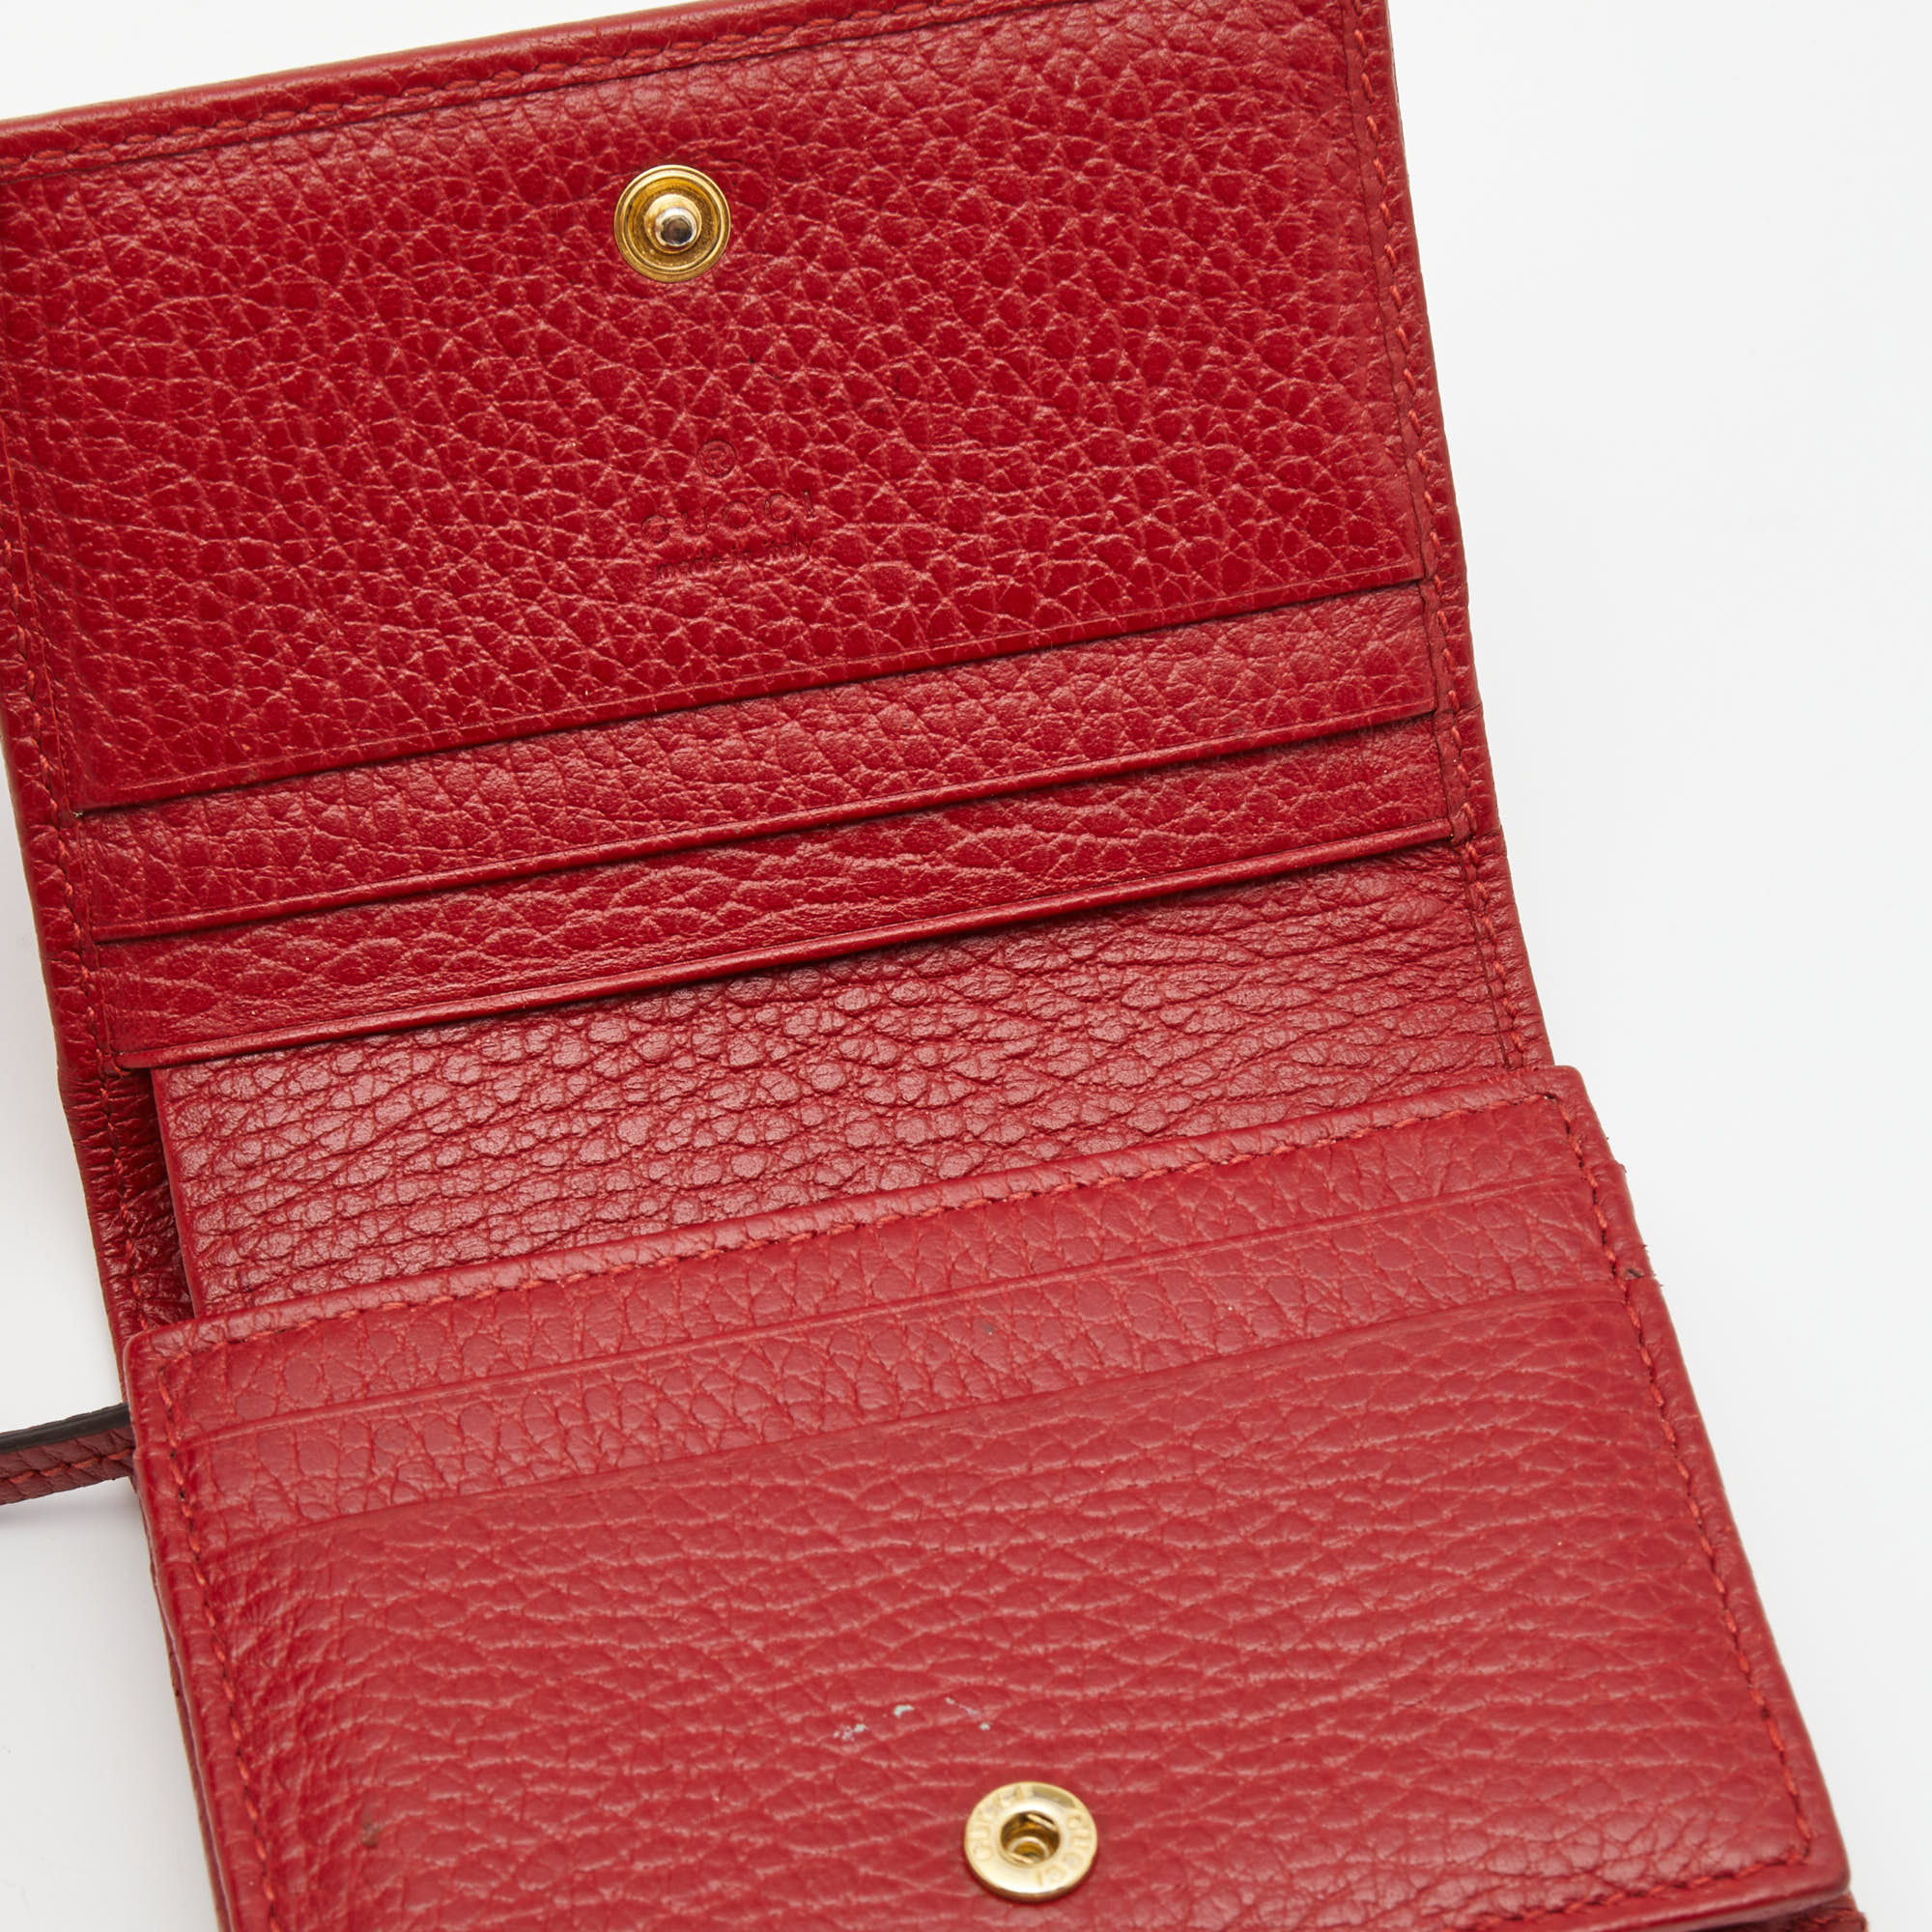 

Gucci Red Leather GG Marmont Flap Card Case